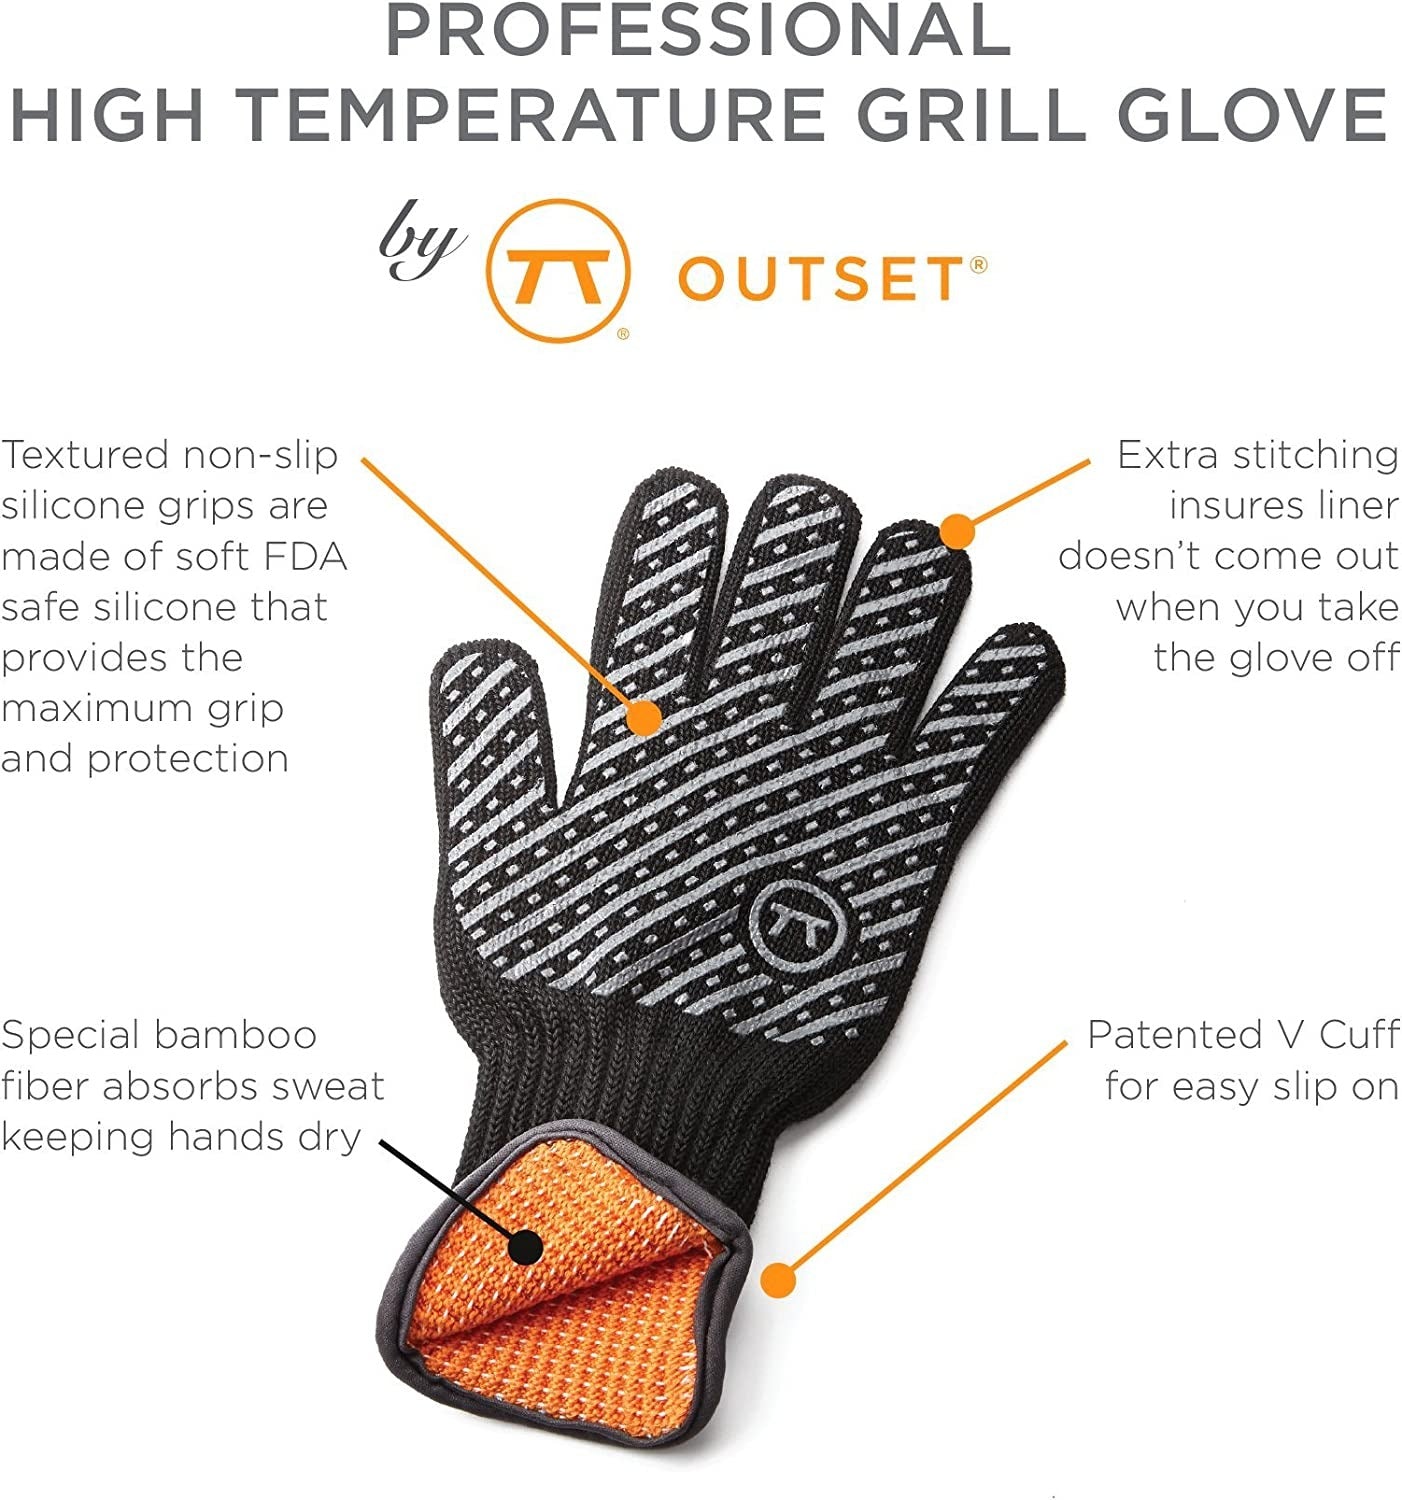 Outset High-Temperature Grill Glove